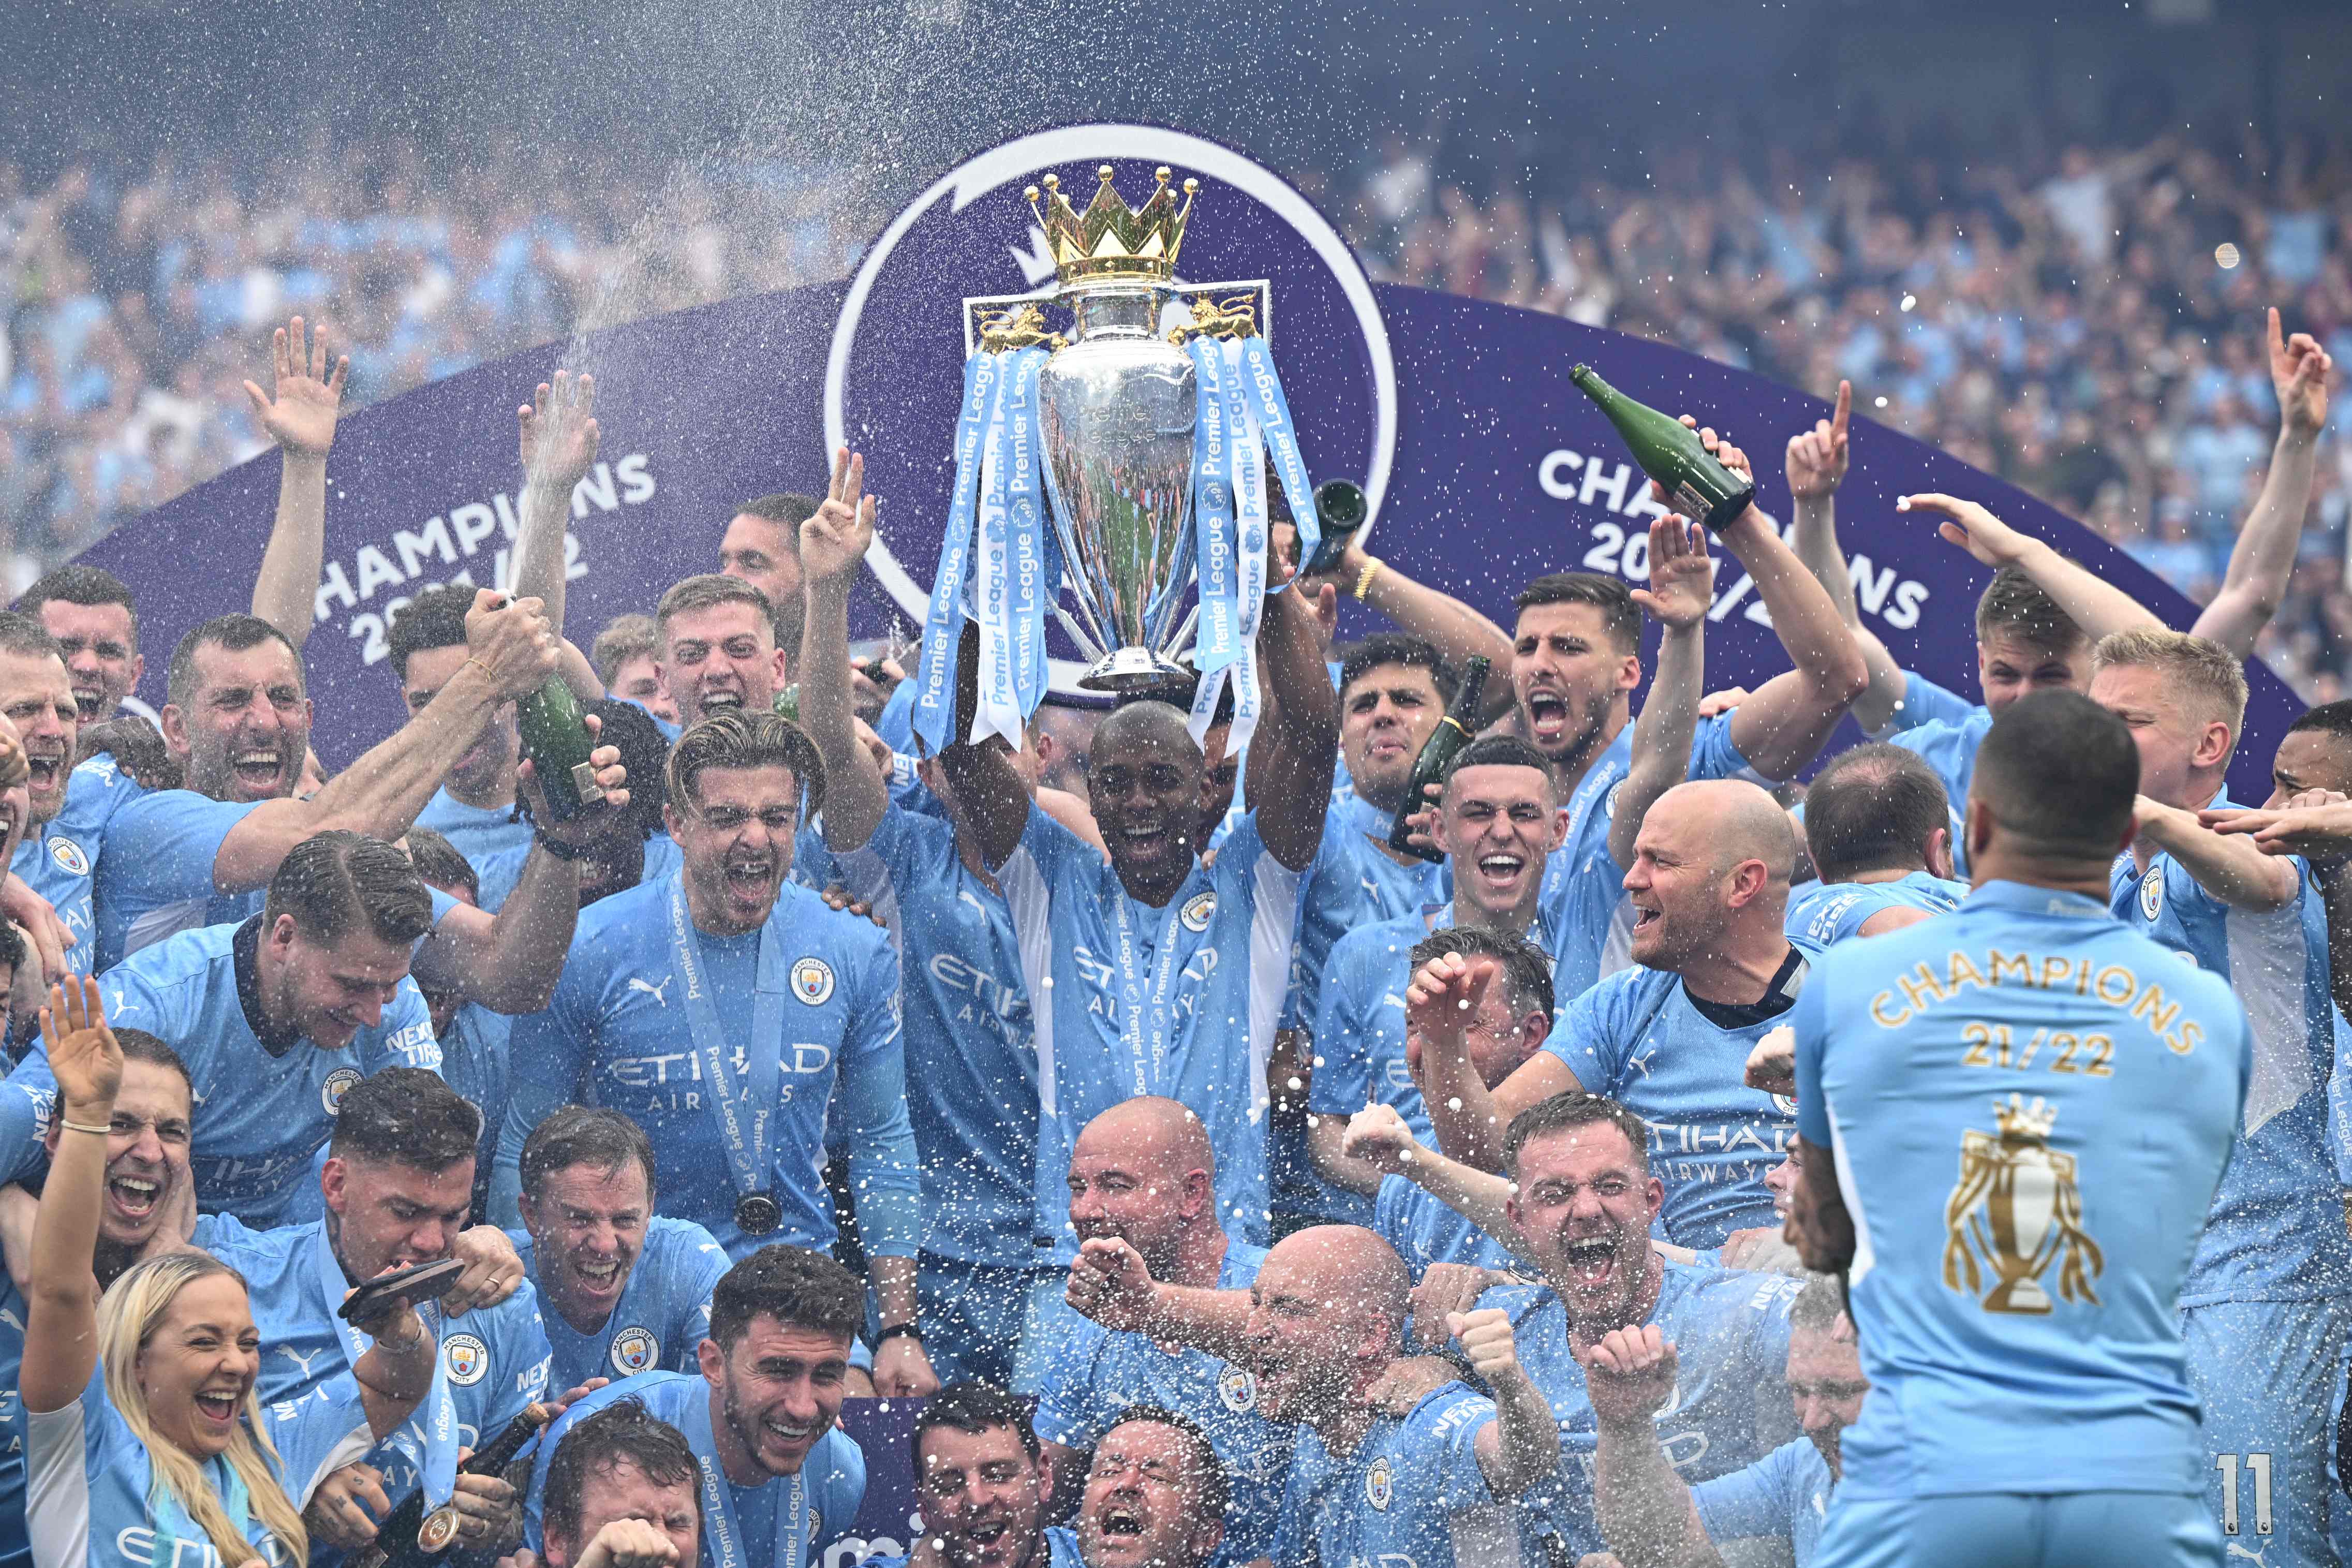 The stage was set for a grandstand finish, and Manchester City didn’t disappoint